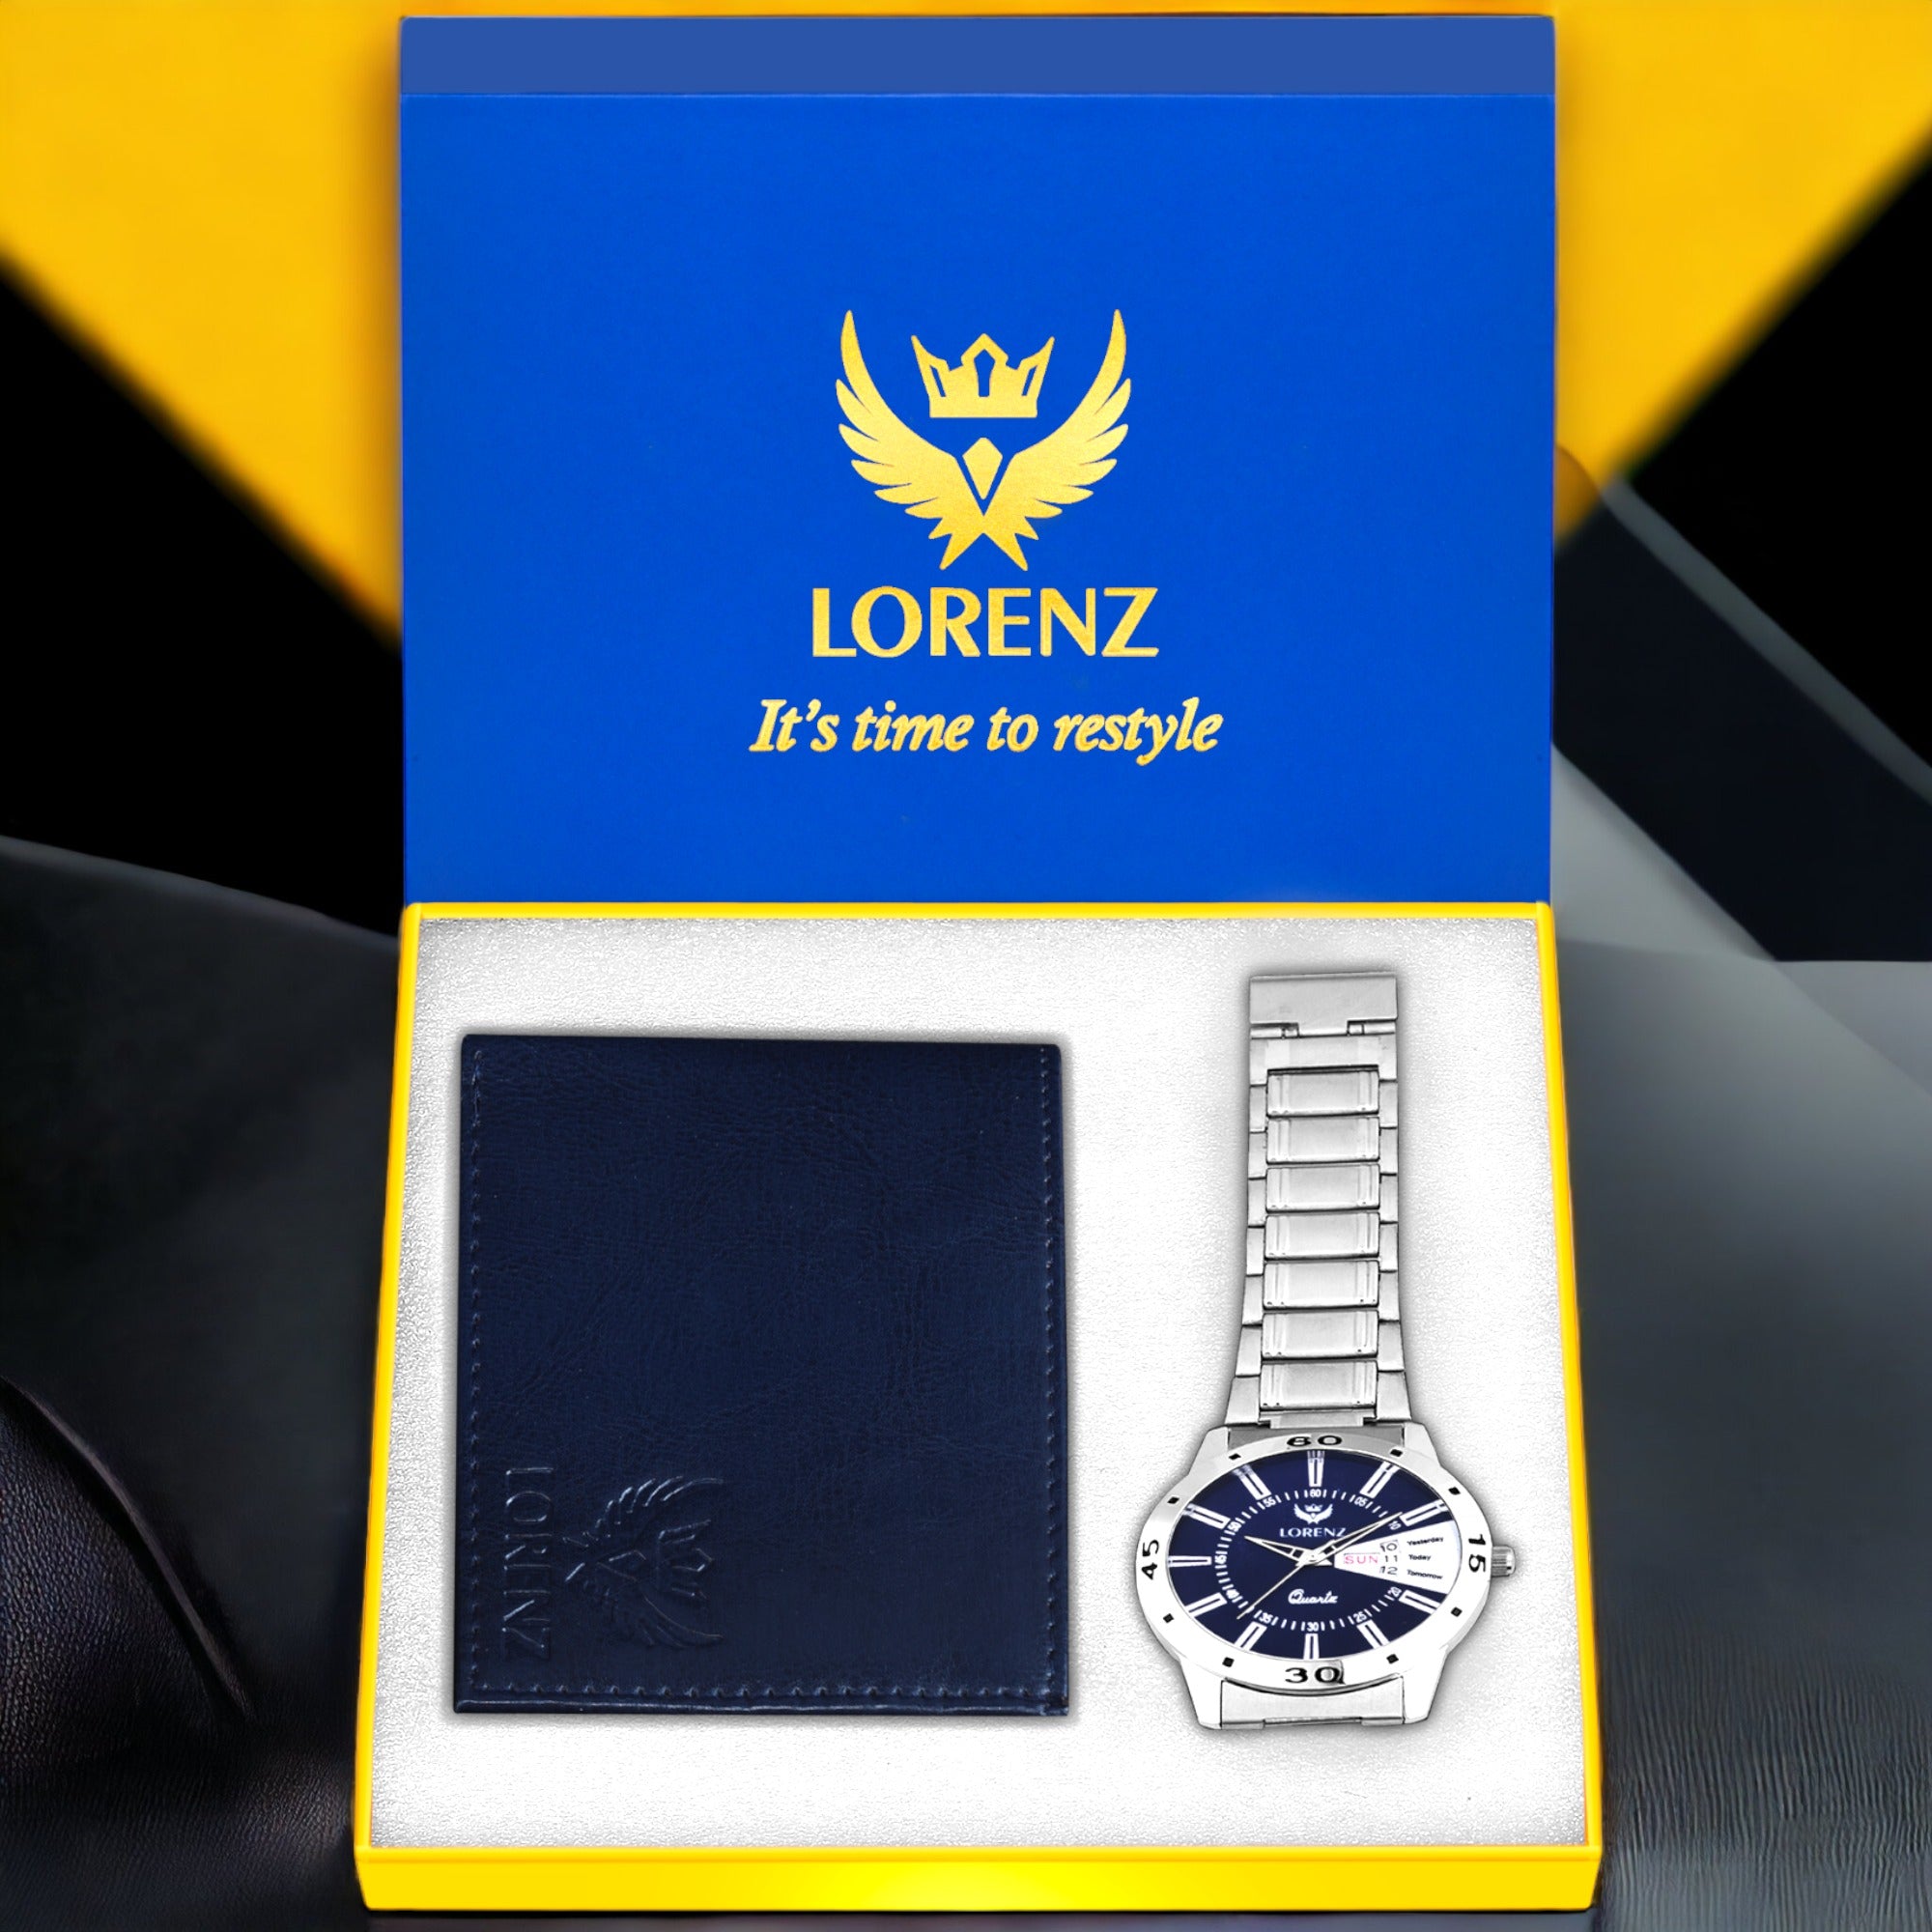 Lorenz Men's Stainless Steel Watch: A close-up photo of the Lorenz watch